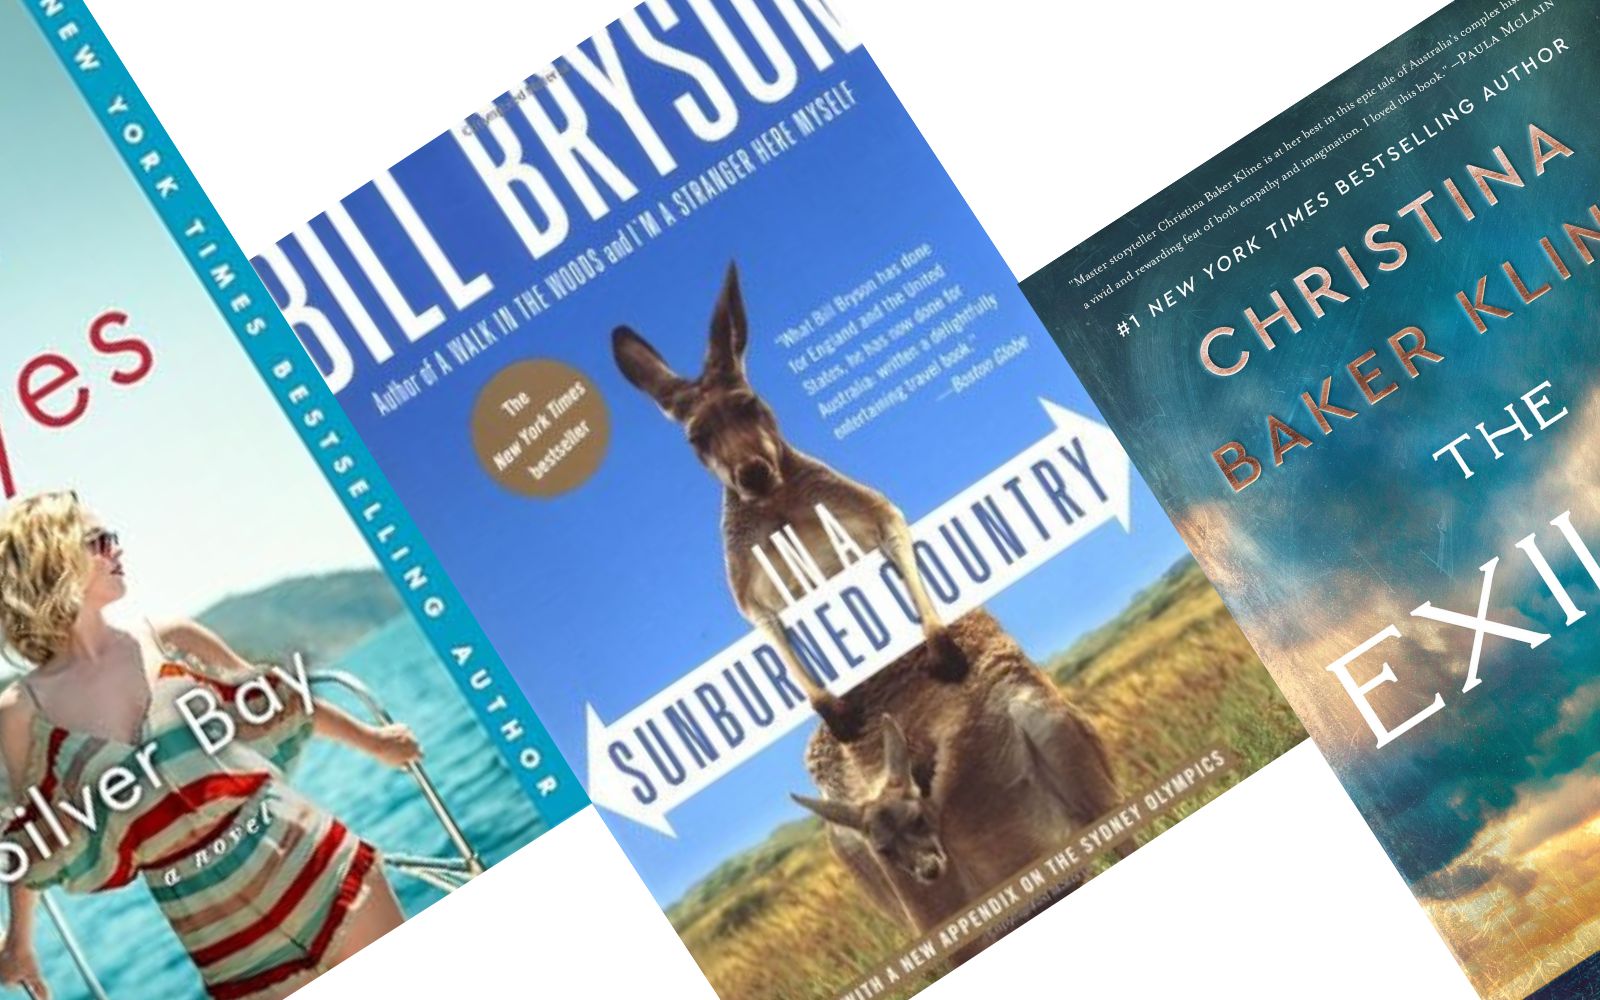 Three angled book covers of books set in Australia with In a Sunburned Country in the middle